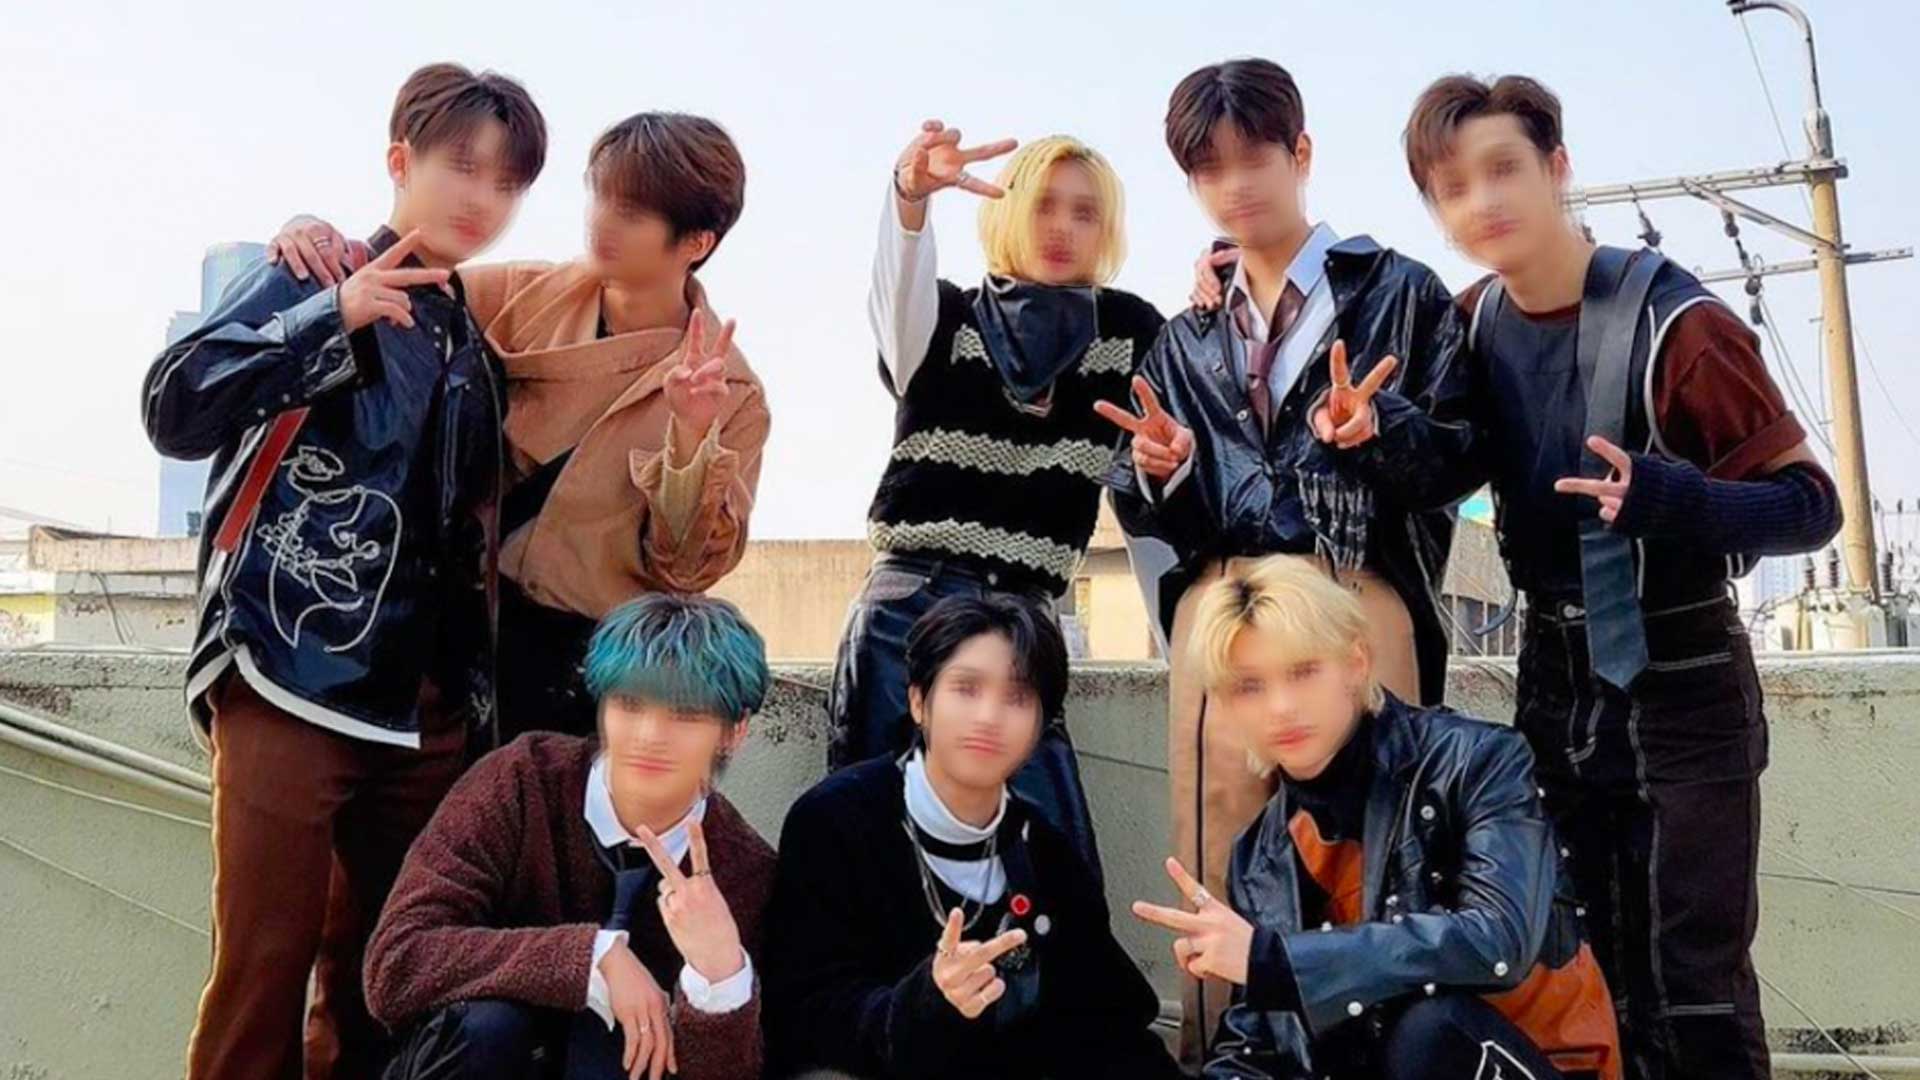 A blurred image of a K-Pop group